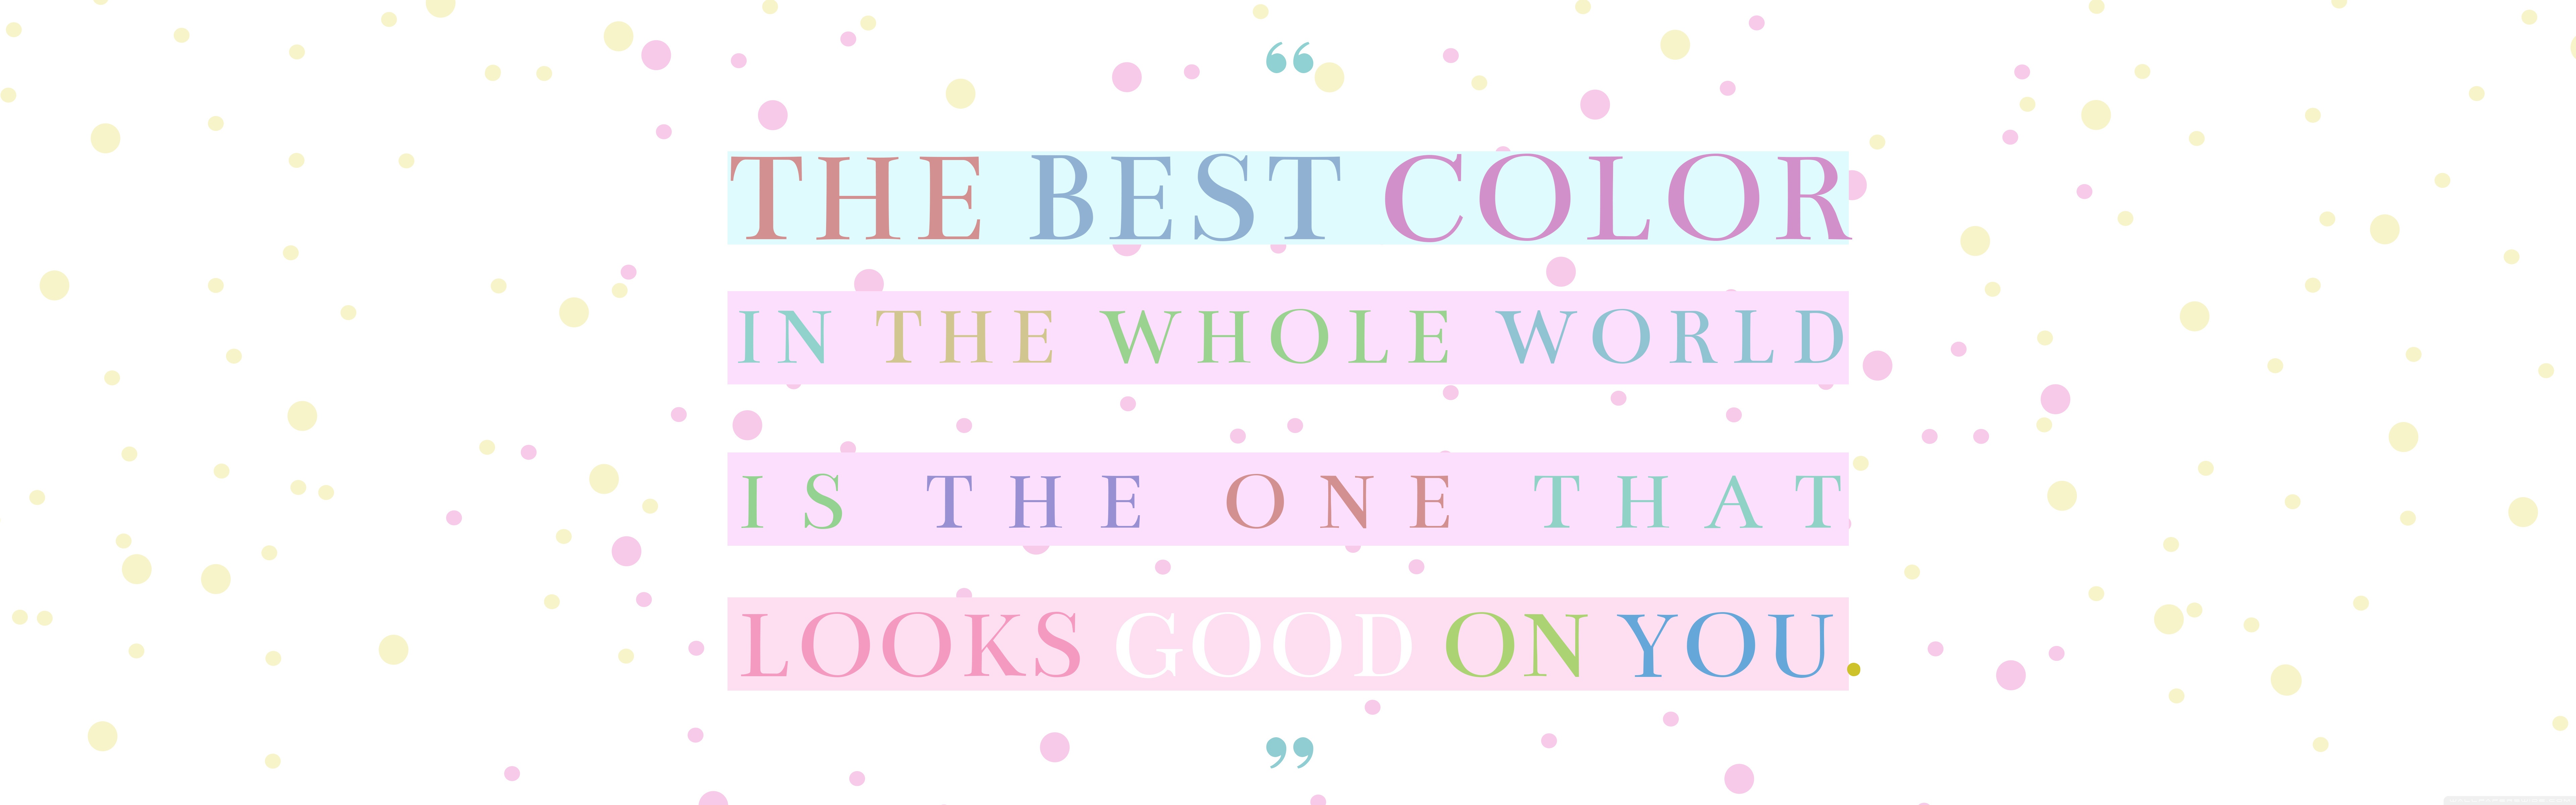 colorful quote desktop backgrounds